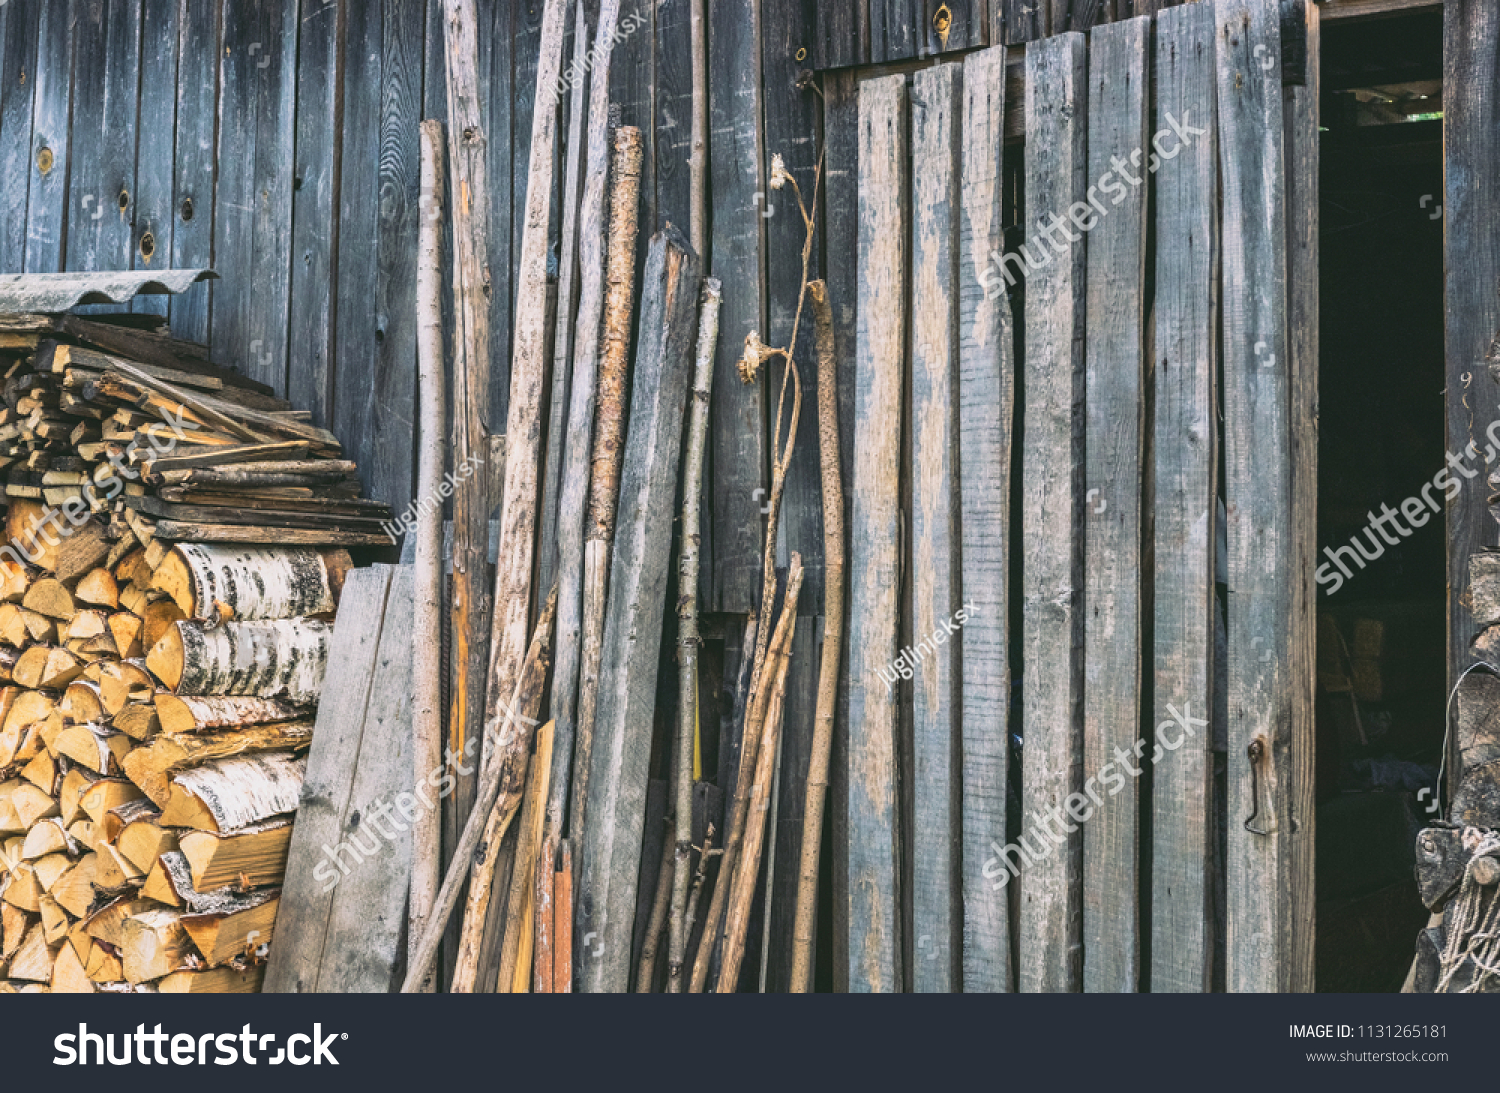 A wall of an old wooden shed. Birch firewood, boards and trees stacked next to him. Doors open. Vintage. #1131265181